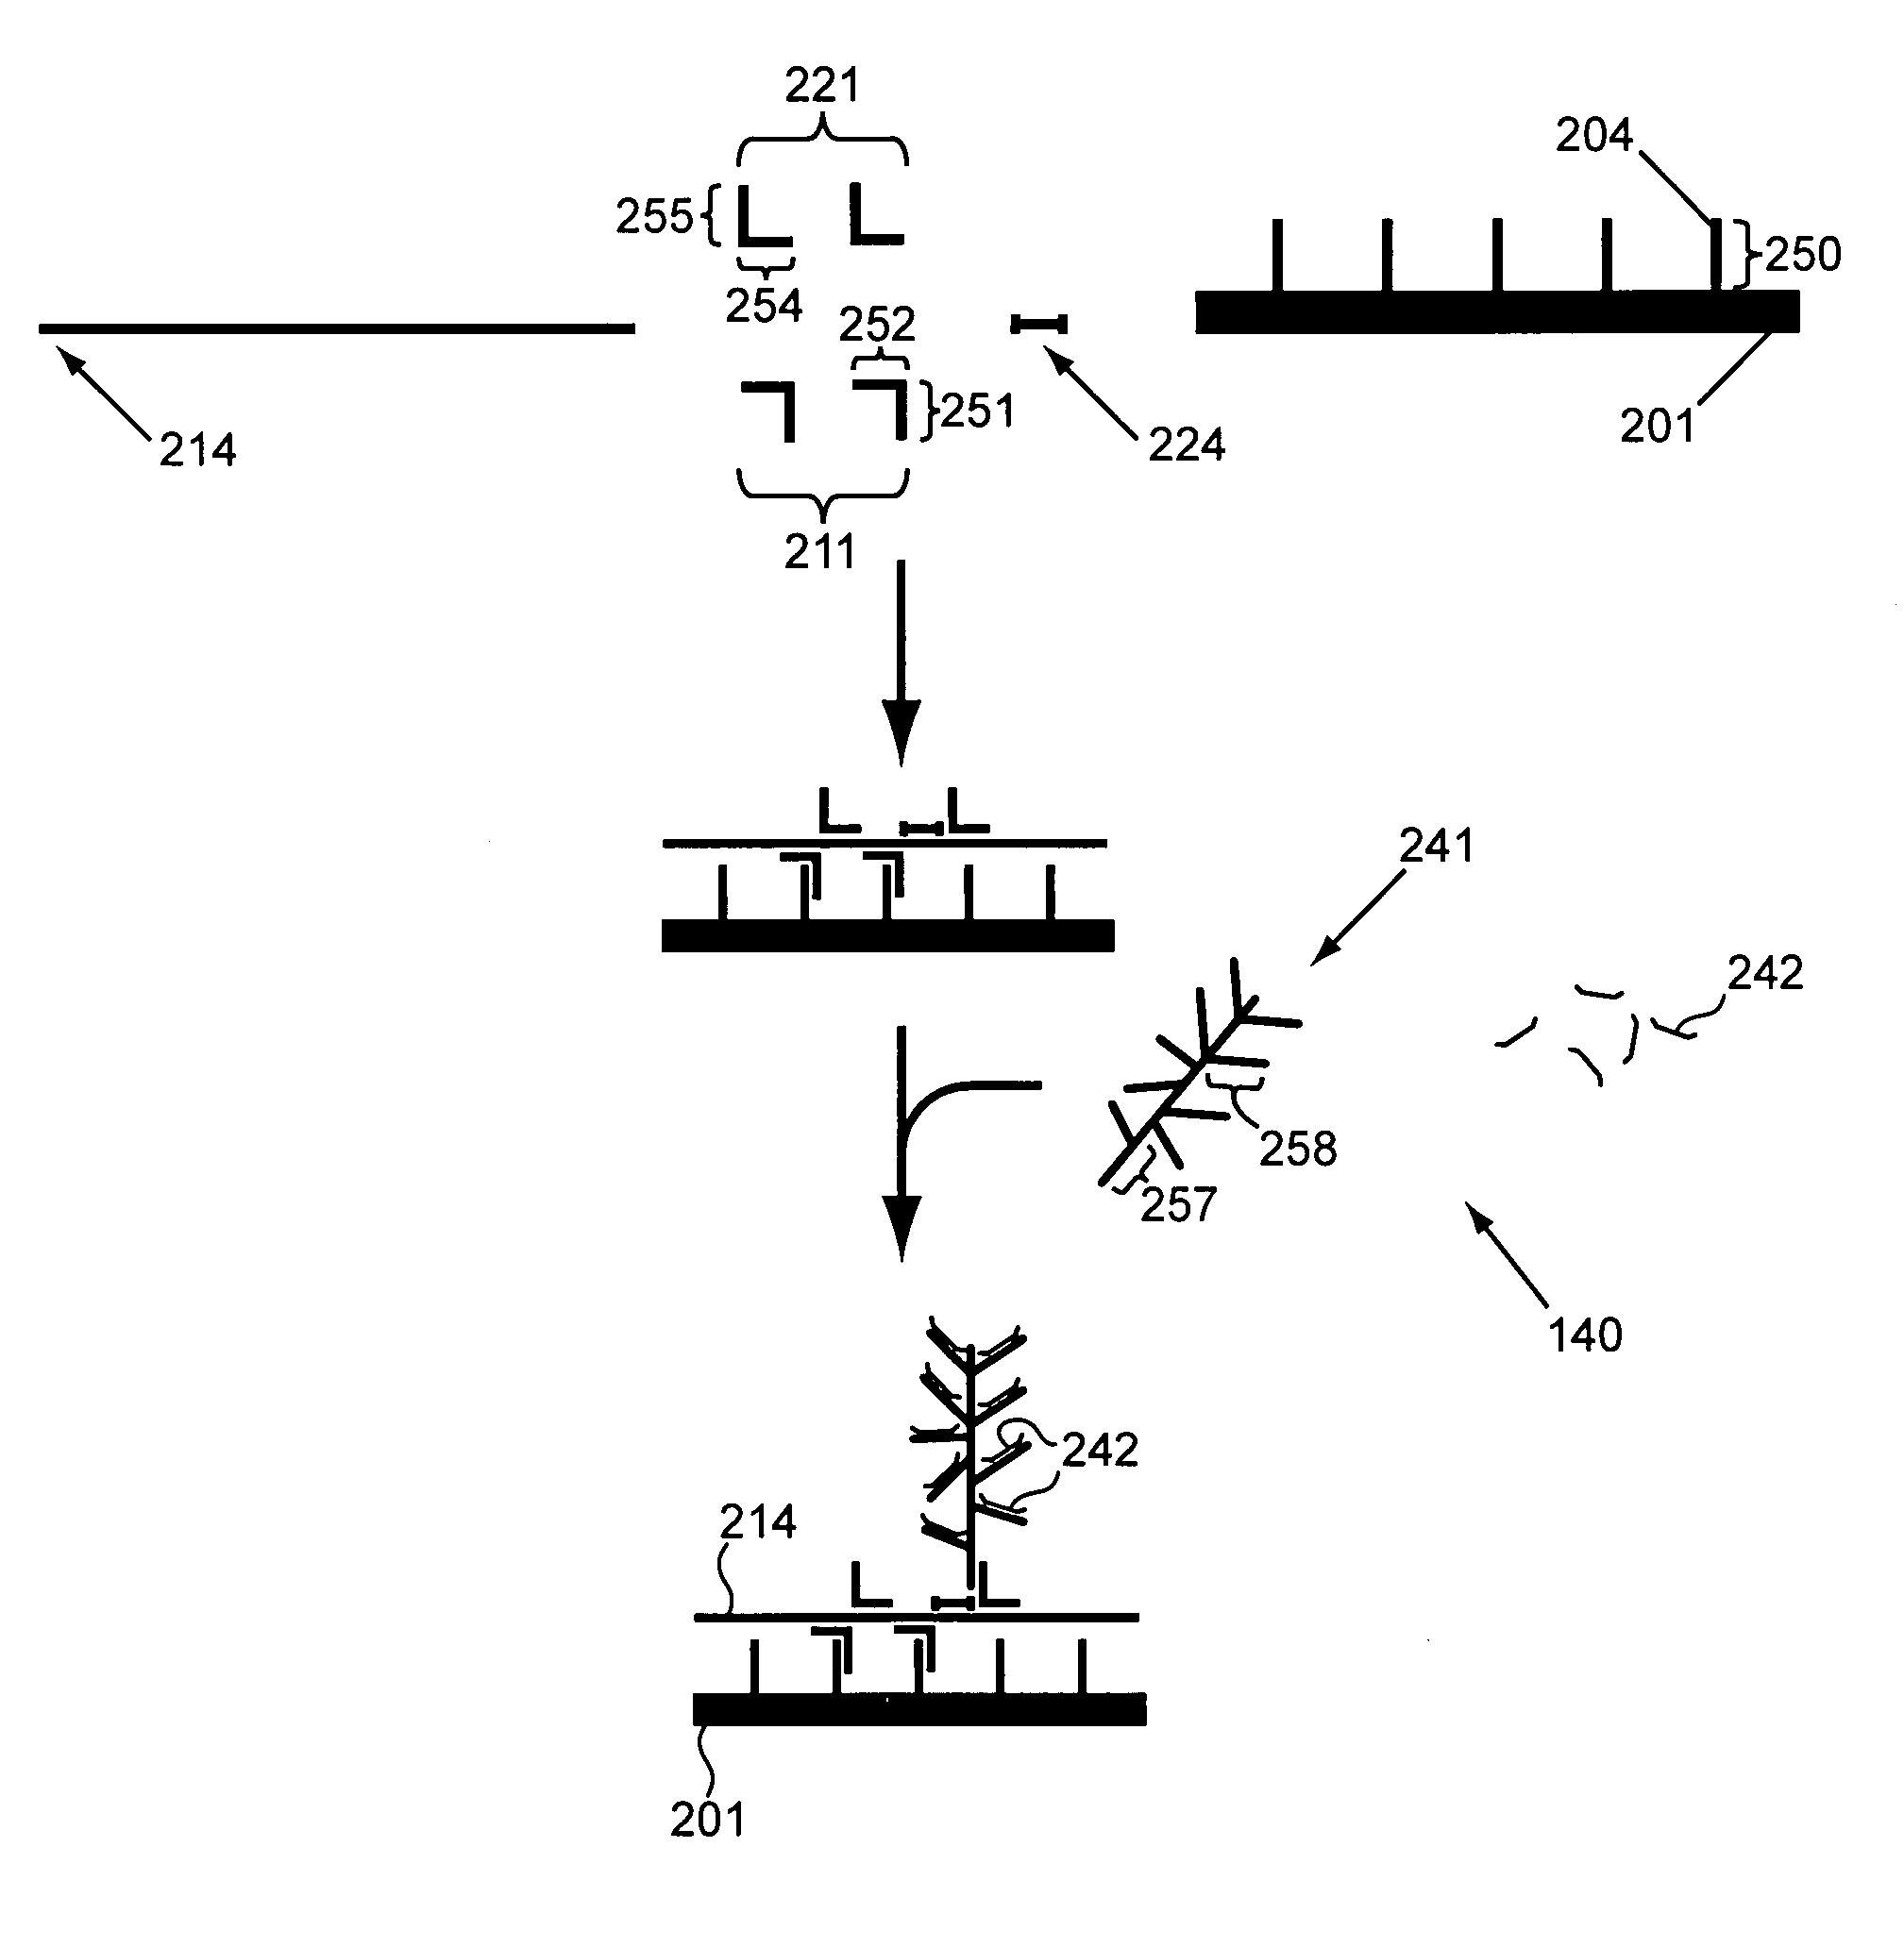 Two stage nucleic acid amplification using an amplification oligomer